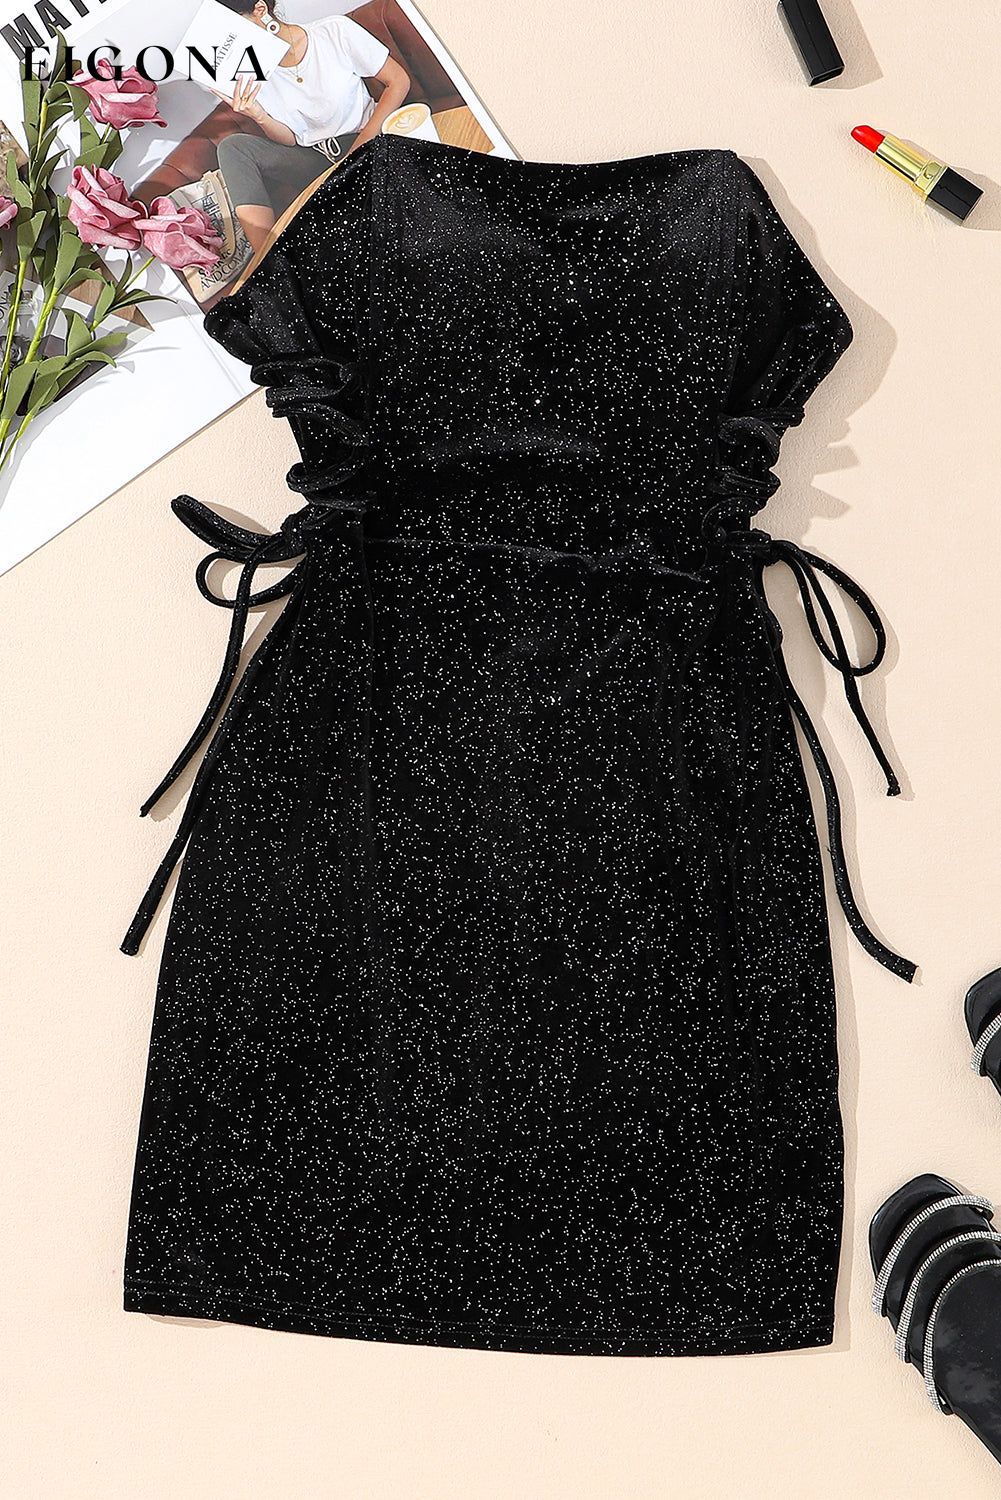 Black Velvet Sequin Lace-Up Tube Mini Dress All In Stock clothes Craft Sequin dress dresses Fabric Velvet formal dress formal dresses Occasion Night Out Print Solid Color Season Fall & Autumn short dresses Silhouette Bodycon Style Elegant